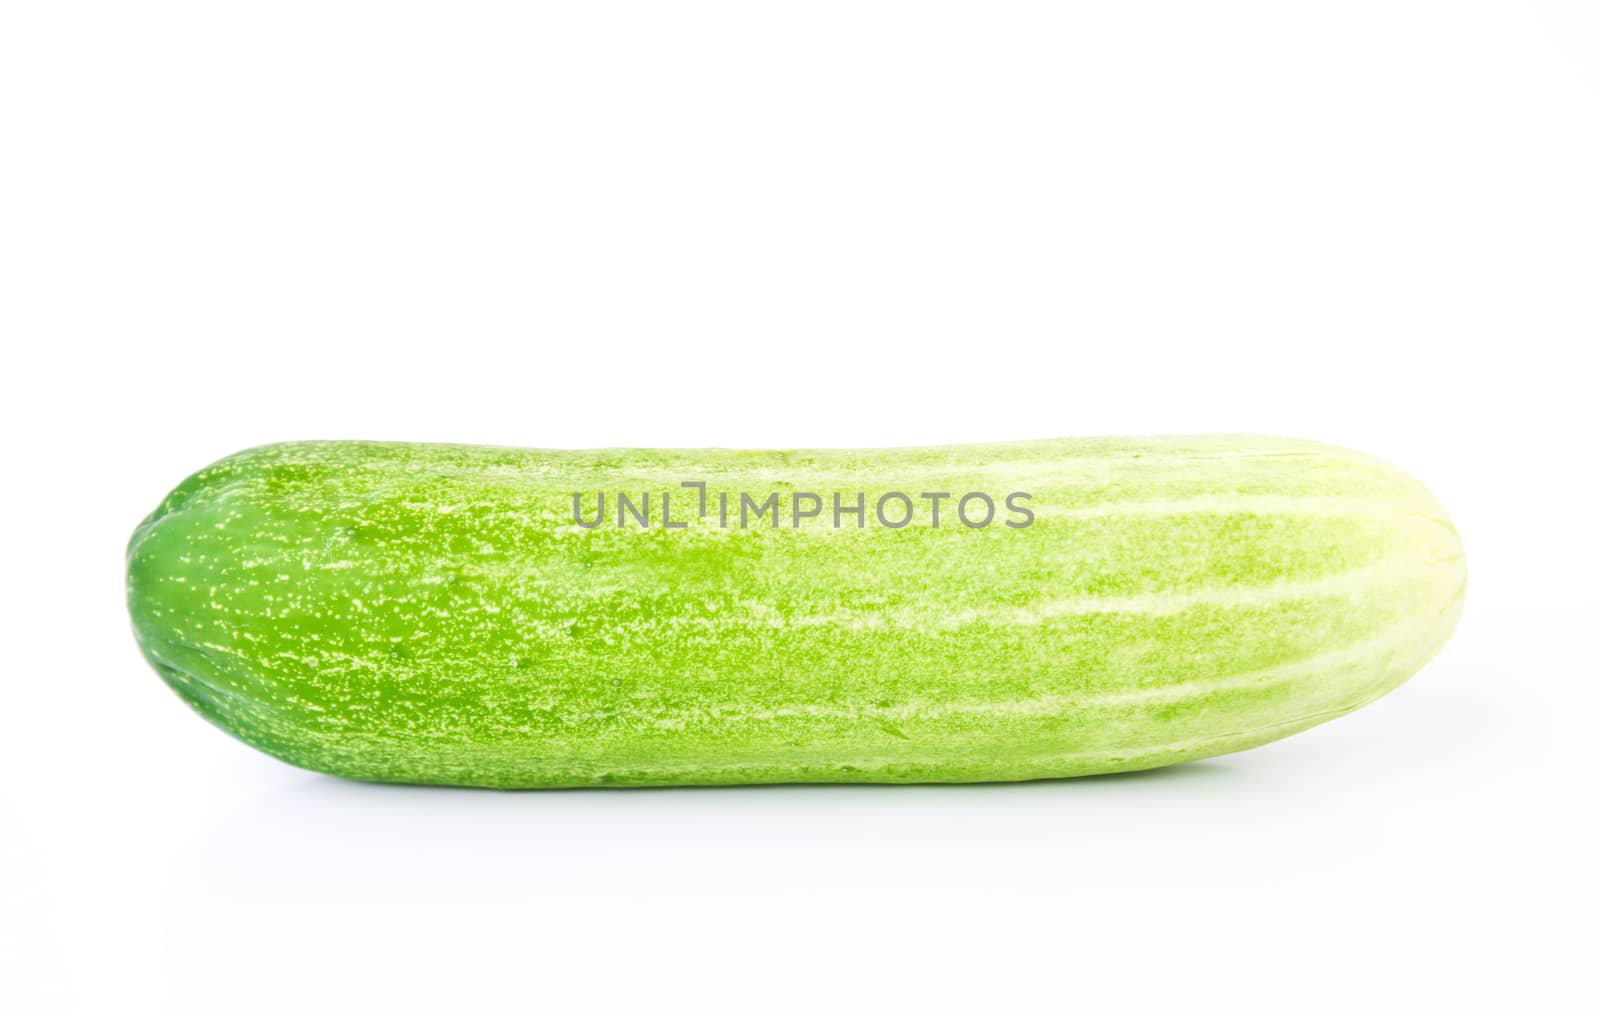 Cucumber isolated on white by den_rutchapong